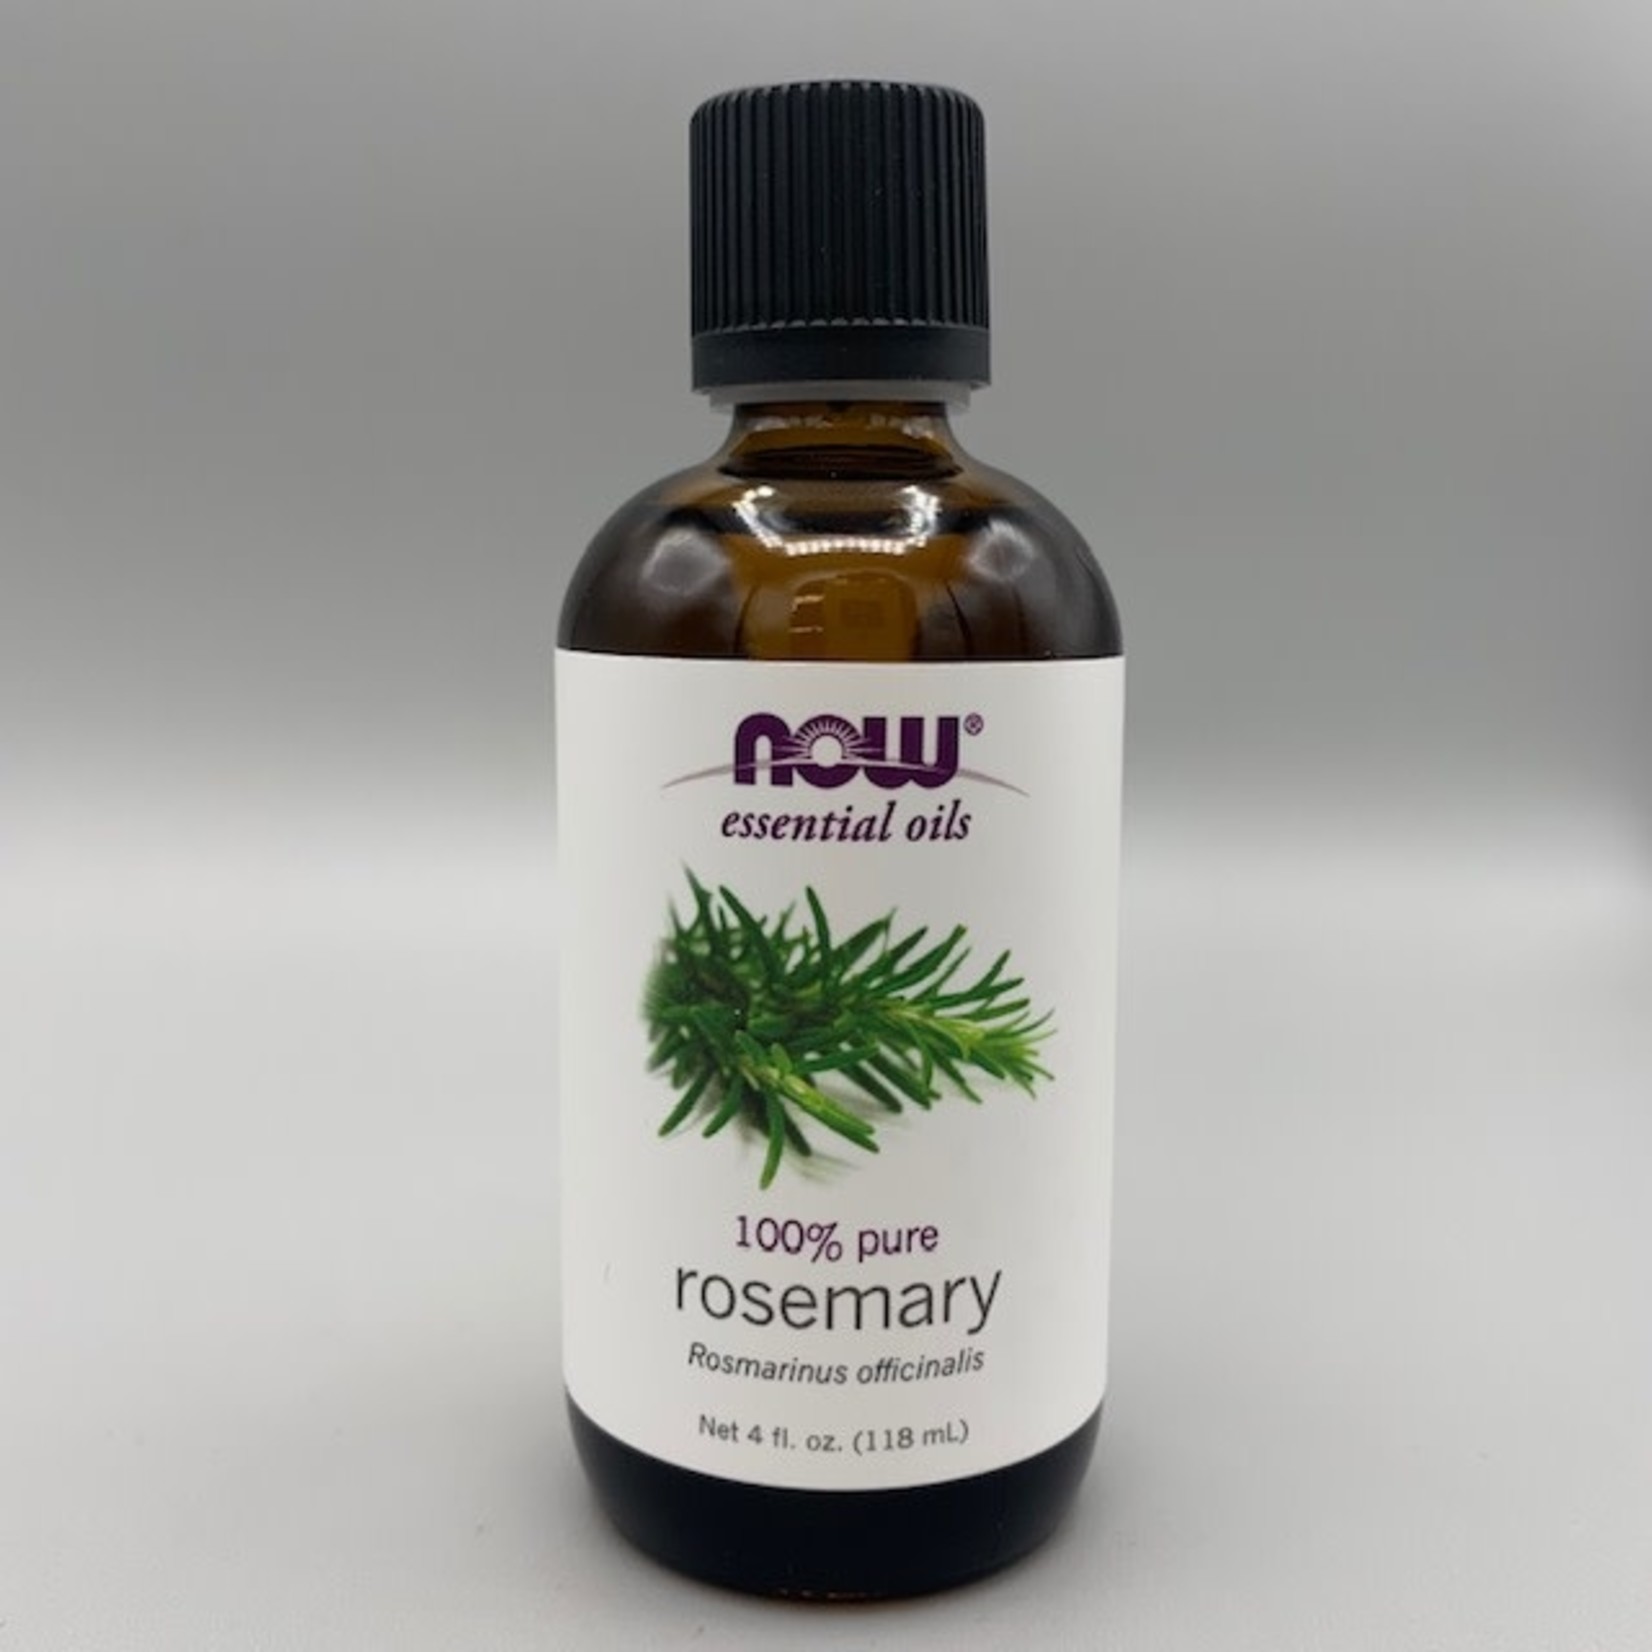 NOW NOW Essential Oil - Rosemary, 4 oz